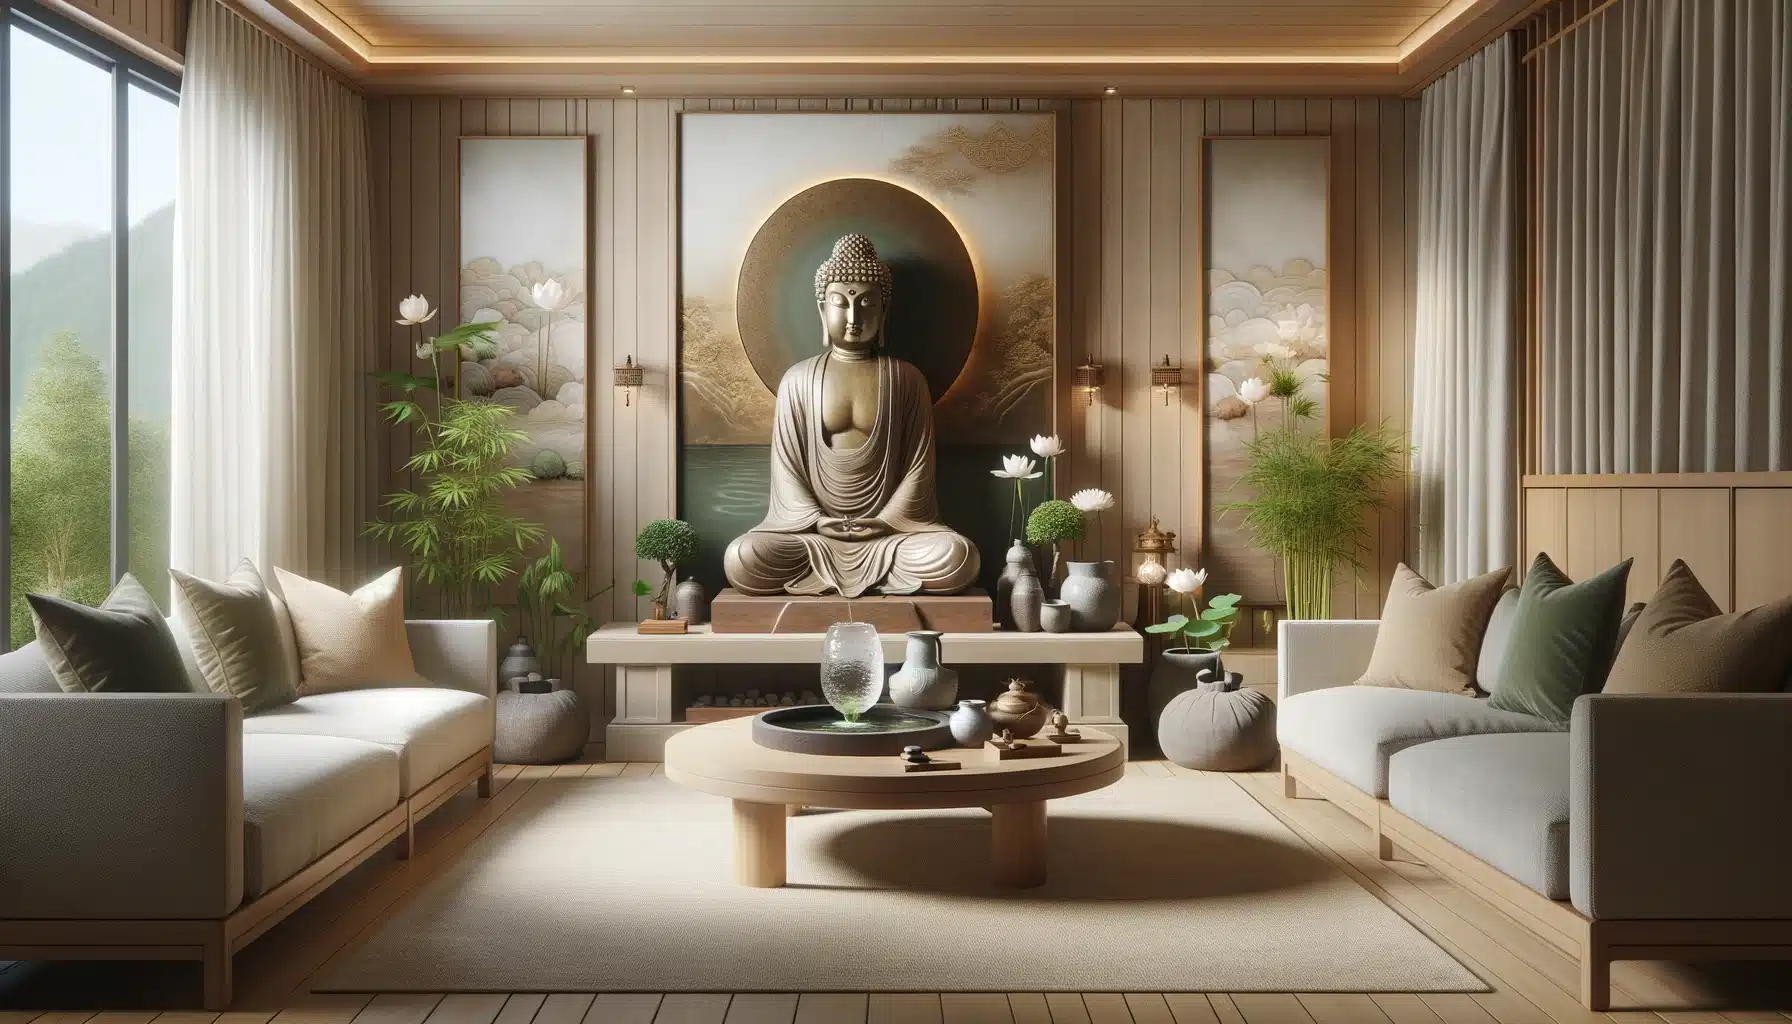 The image depicts a serene and harmonious living room designed with incorporating Buddha themes. It's bathed in soft, natural light, highlighting a large, elegant Buddha statue on a wooden pedestal at the room's heart. The walls are decorated with Zen-inspired artwork, enhancing the space's peaceful aura. Around the room, potted bamboo plants and lotus flowers add a touch of nature. A small water fountain in one corner bubbles gently, contributing to the soothing ambiance. The minimalist furniture, including a low wooden coffee table and floor cushions, offers a place for contemplation or meditation. The room's earthy color scheme, featuring shades of beige, green, and brown, creates a calming atmosphere, inviting relaxation and reflection.